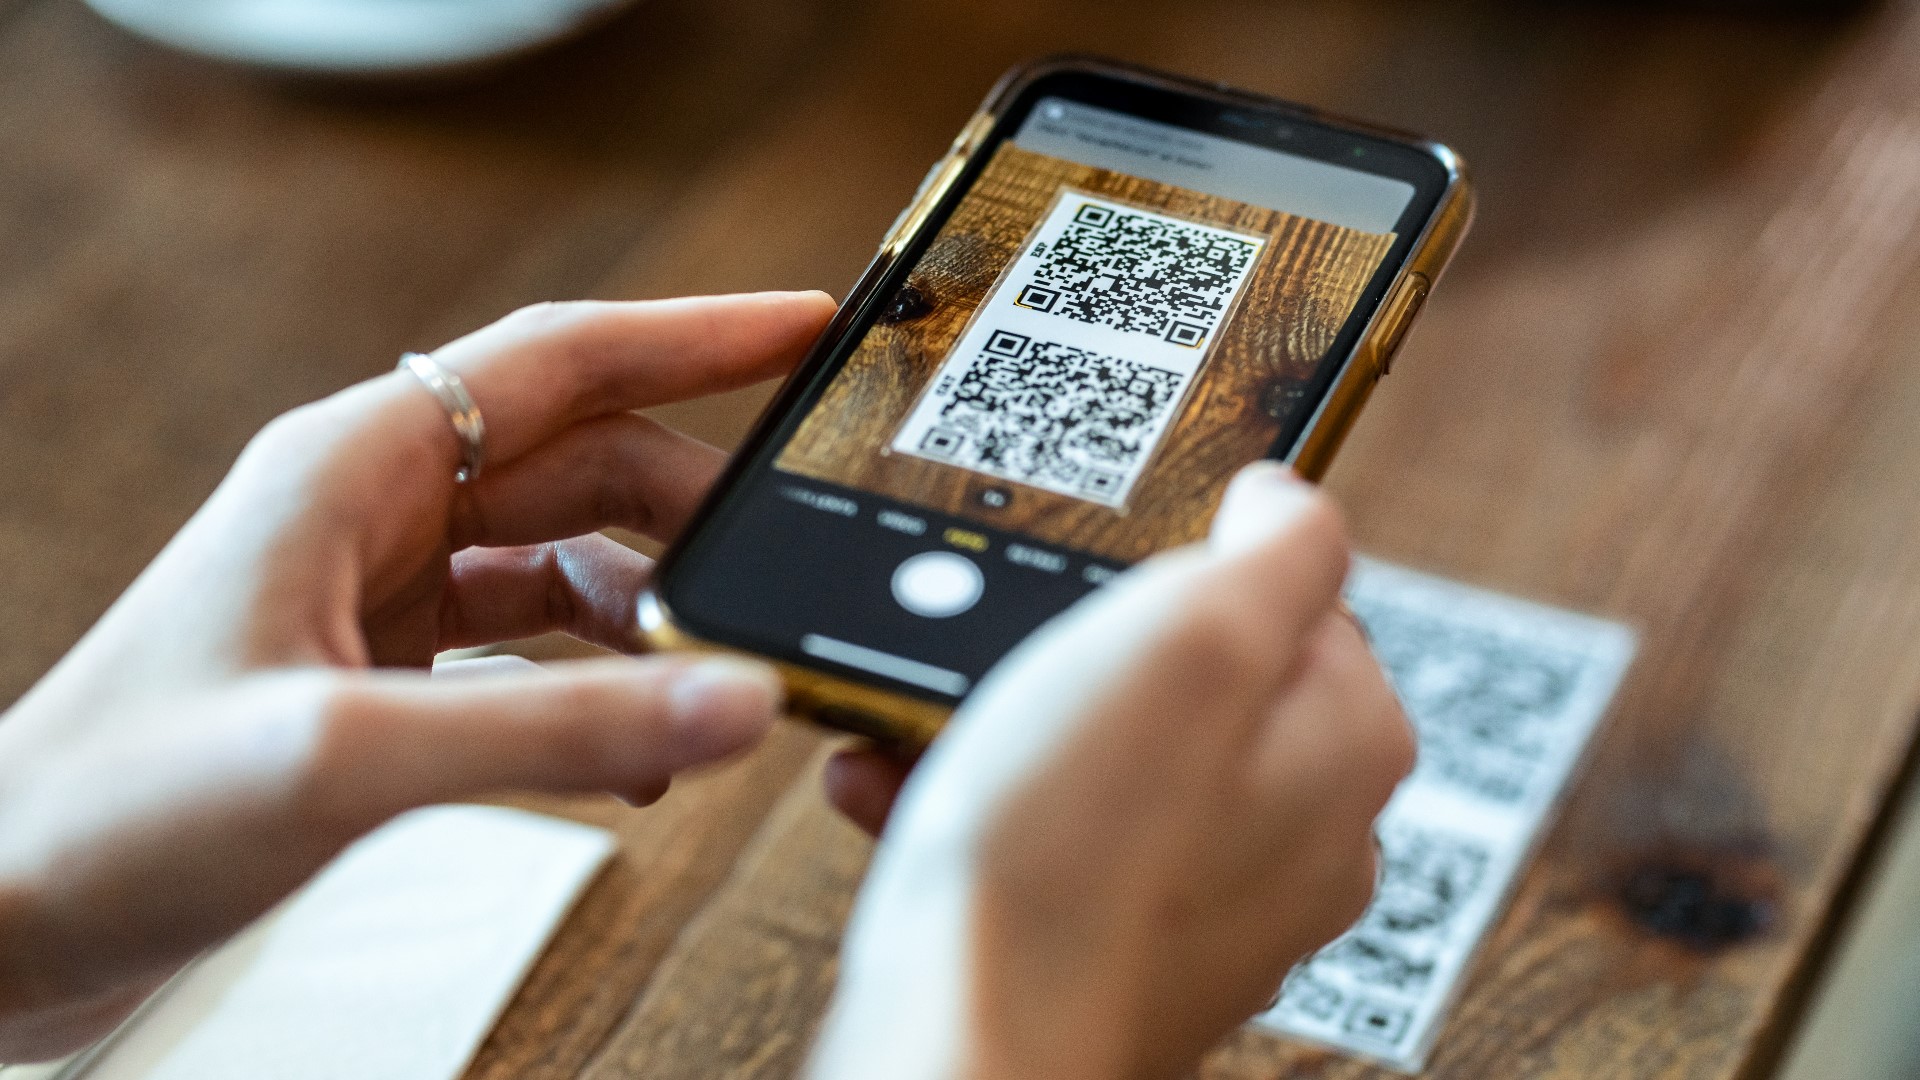 With just one tap of your cell phone camera, QR codes give customers instant access to restaurant menus, flight tastings and so much more.